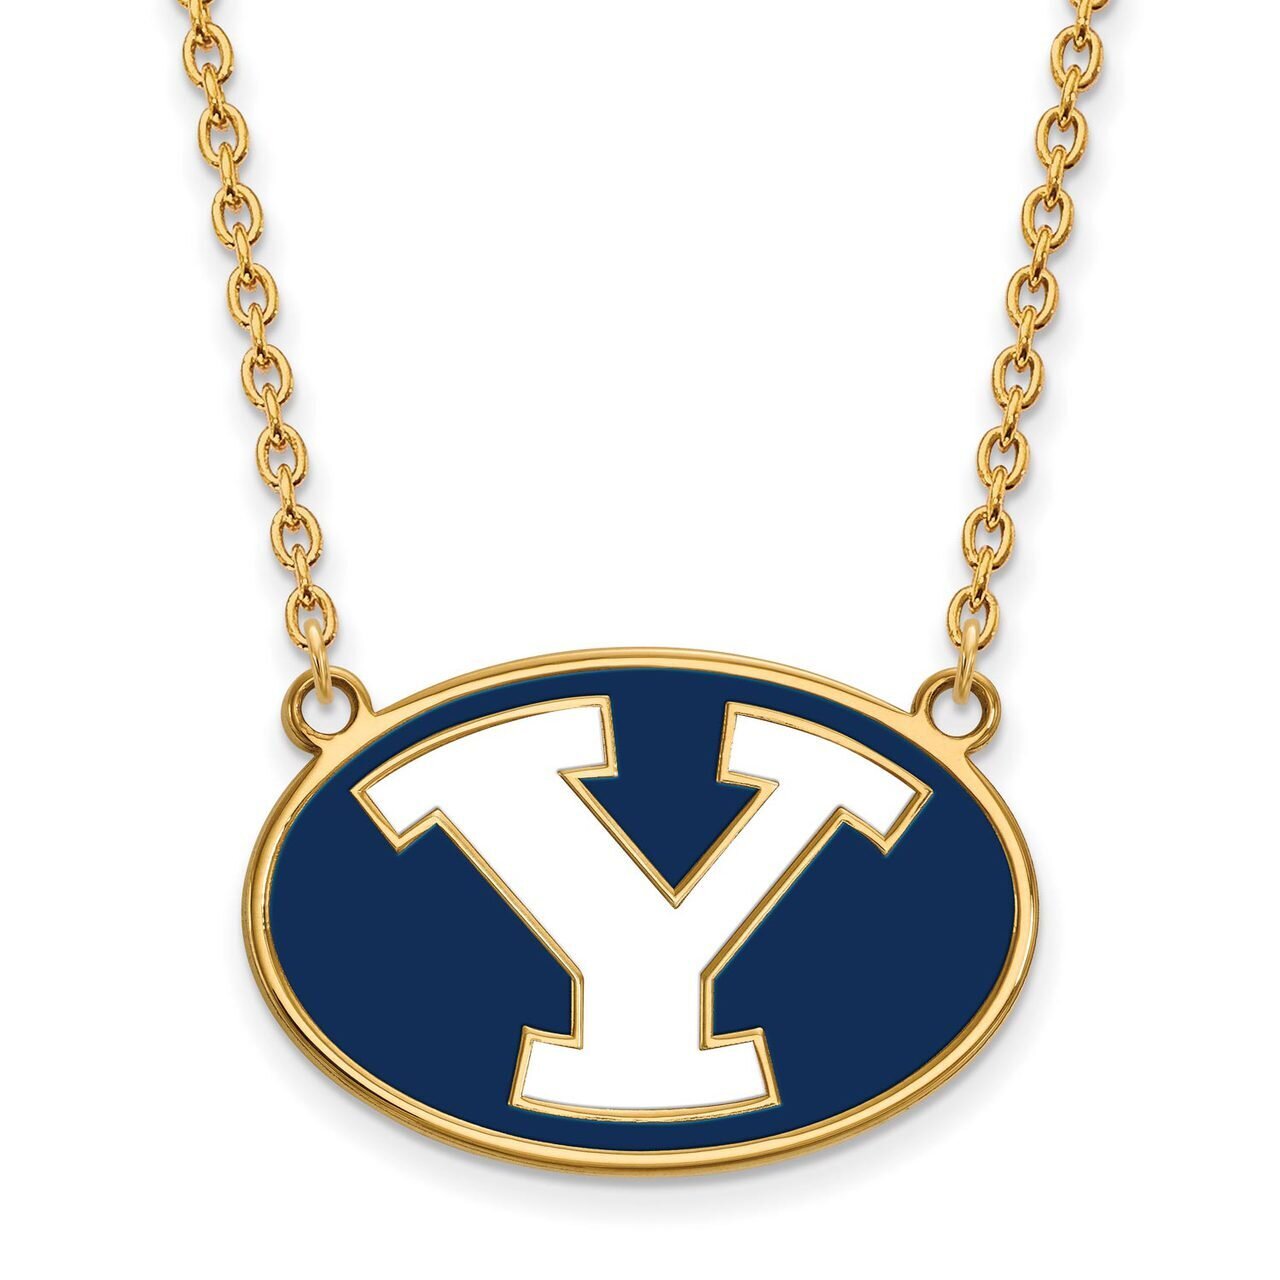 Brigham Young University Enamel Large Pendant with Chain Necklace Gold-plated Silver GP011BYU-18